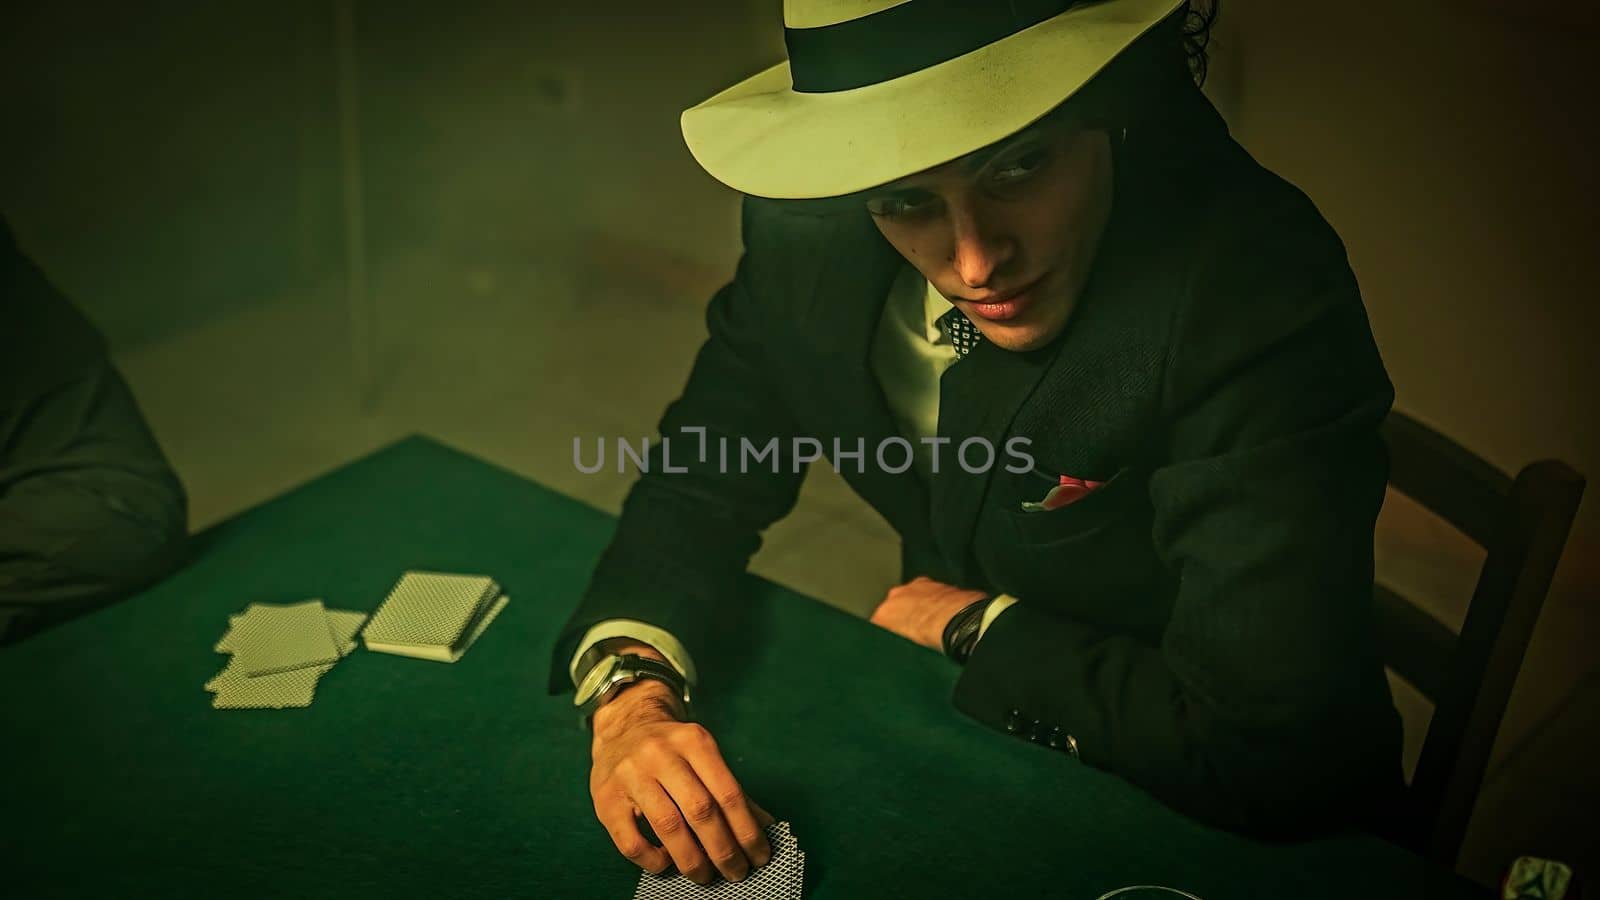 A group of friends are gathered around a green, textured poker table, where a young man dressed in a suit is actively engaged in a game of poker. There is a drink glass visible on the table.